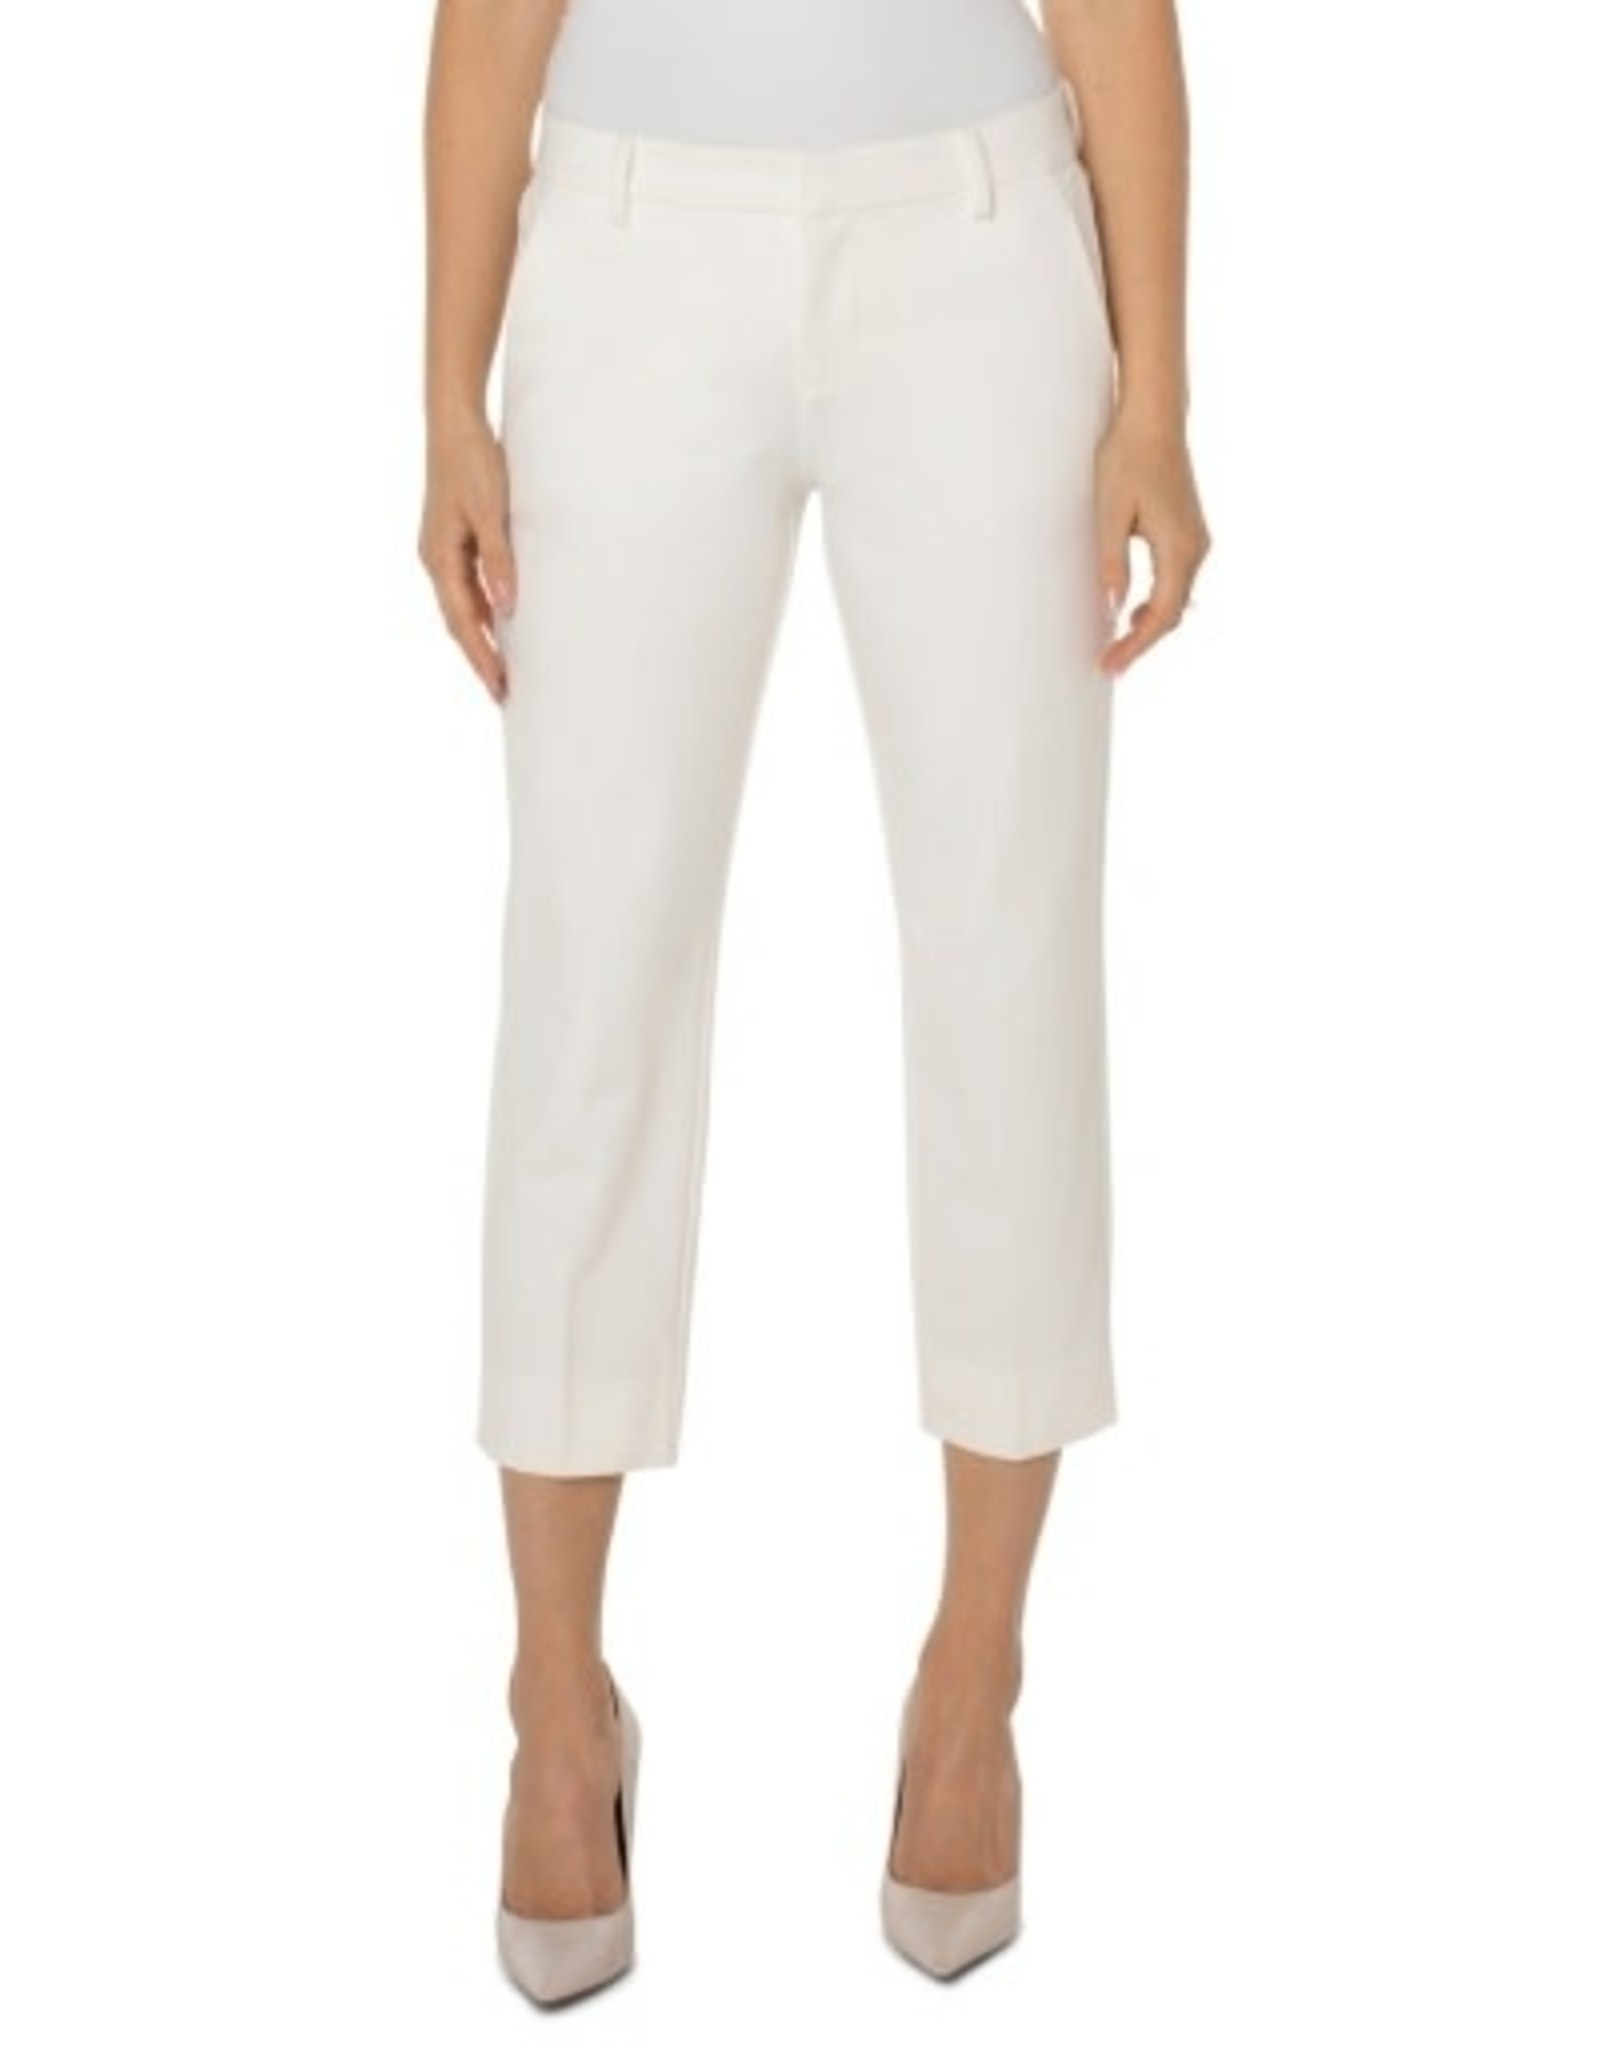 Liverpool Los Angeles Kelsey Knit Crop Trouser with Slit 26in Inseam